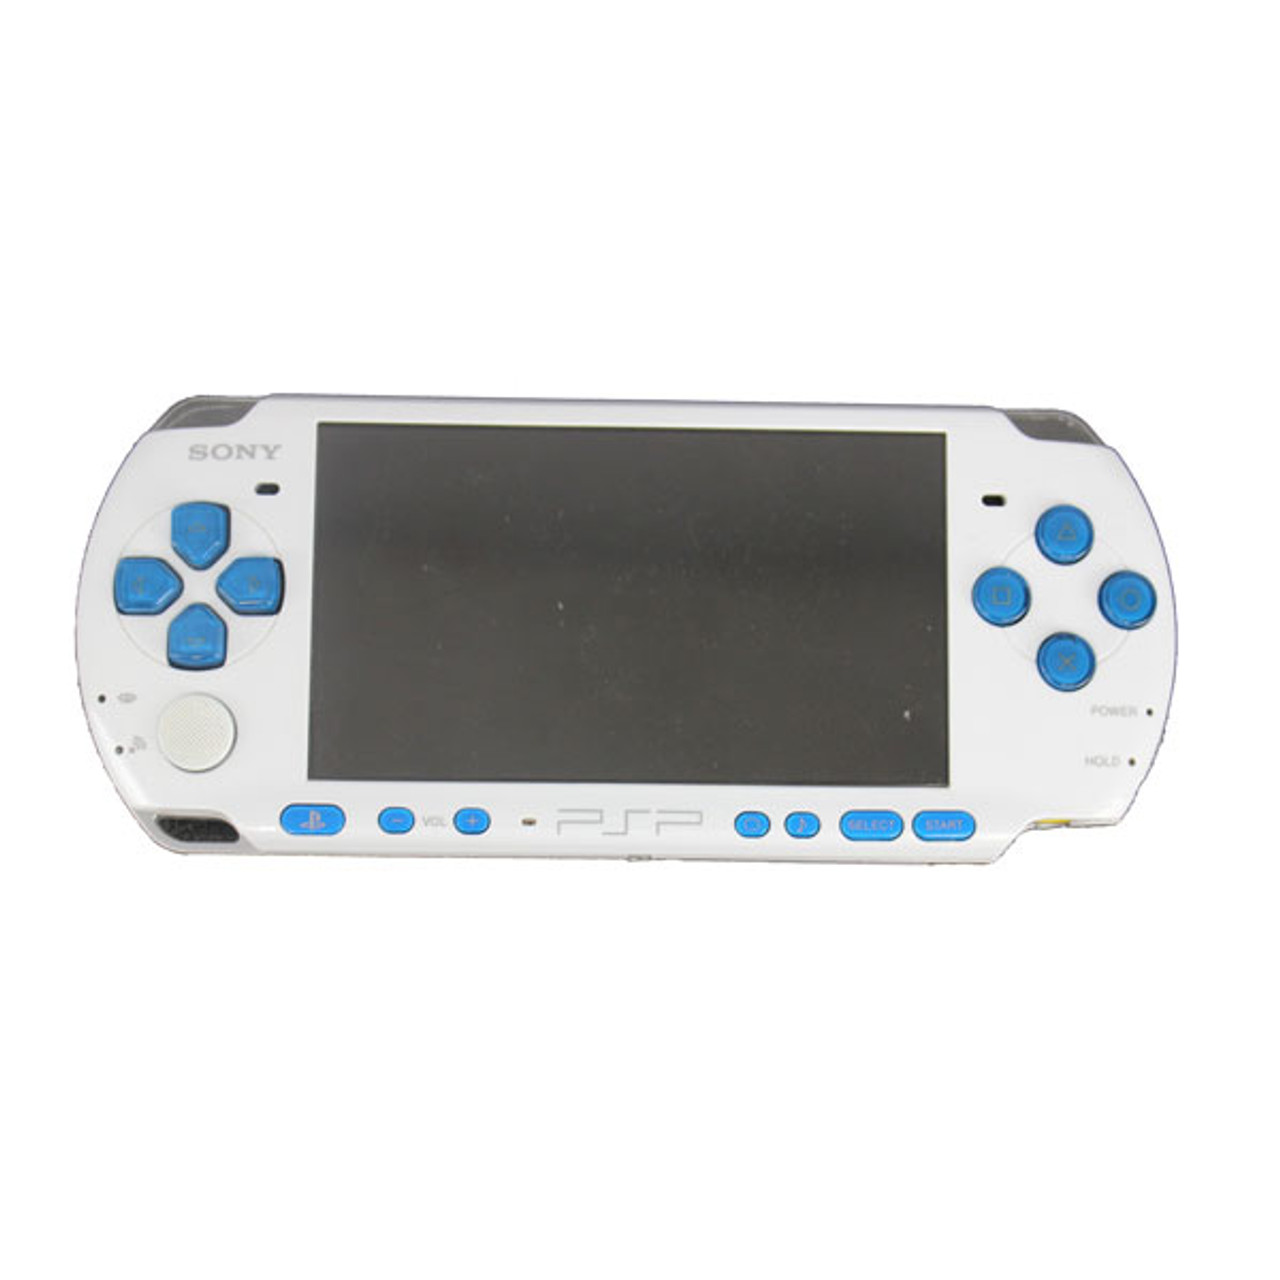 Retrofit Sony PSP 3000 Handheld PSP System Game Console-Clear White Color